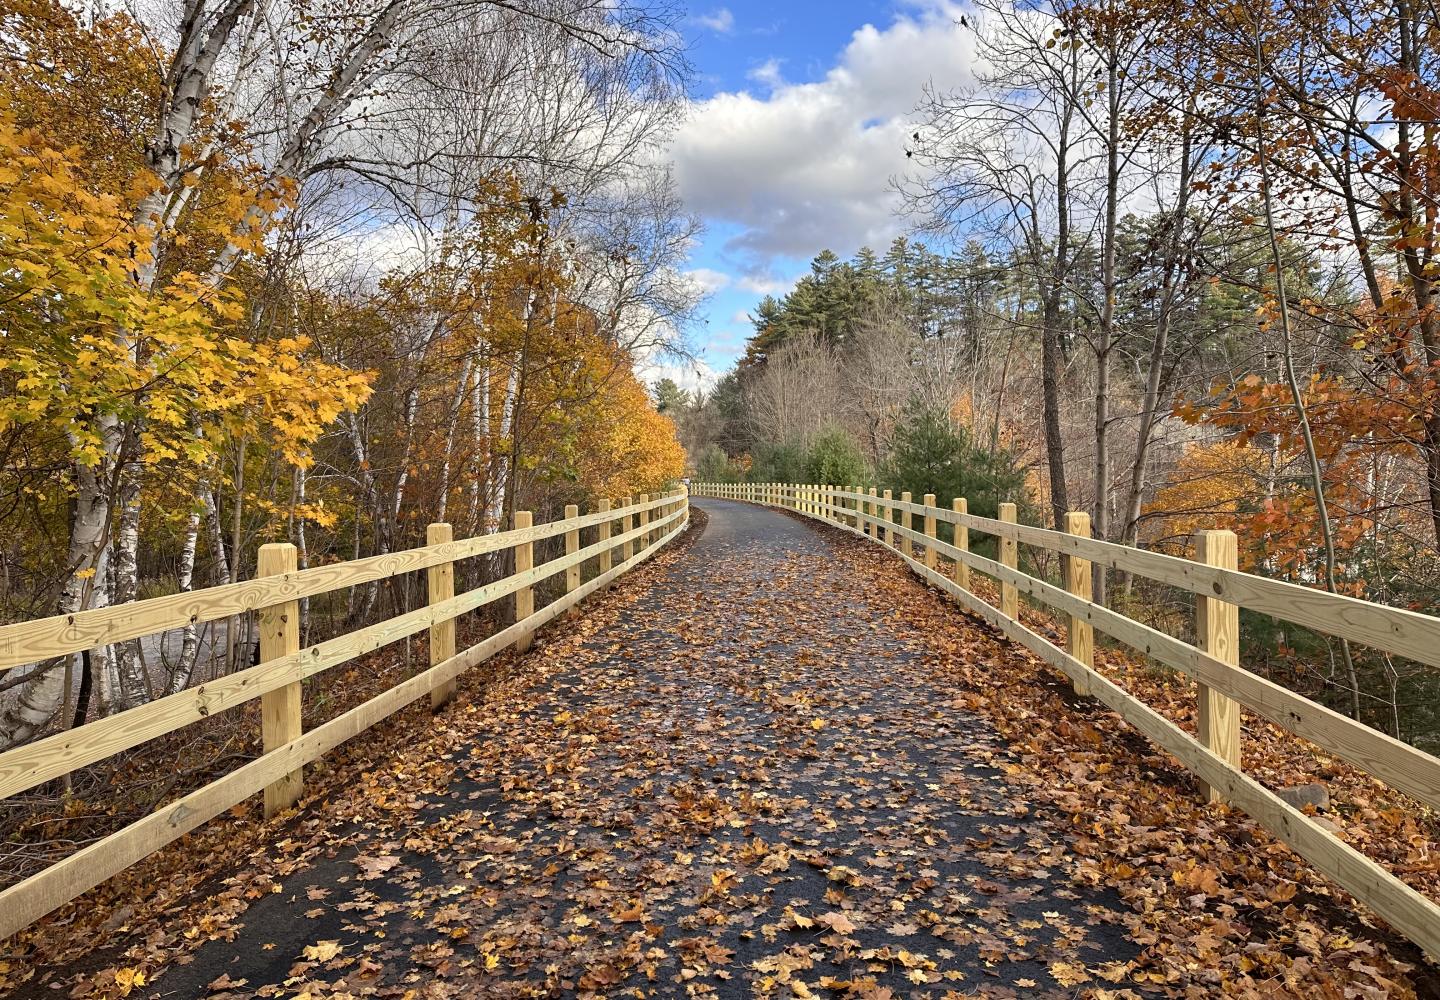 While most of the Adirondack Rail Trail will be firmly packed stone dust, the section through the Village of Saranac Lake is paved.